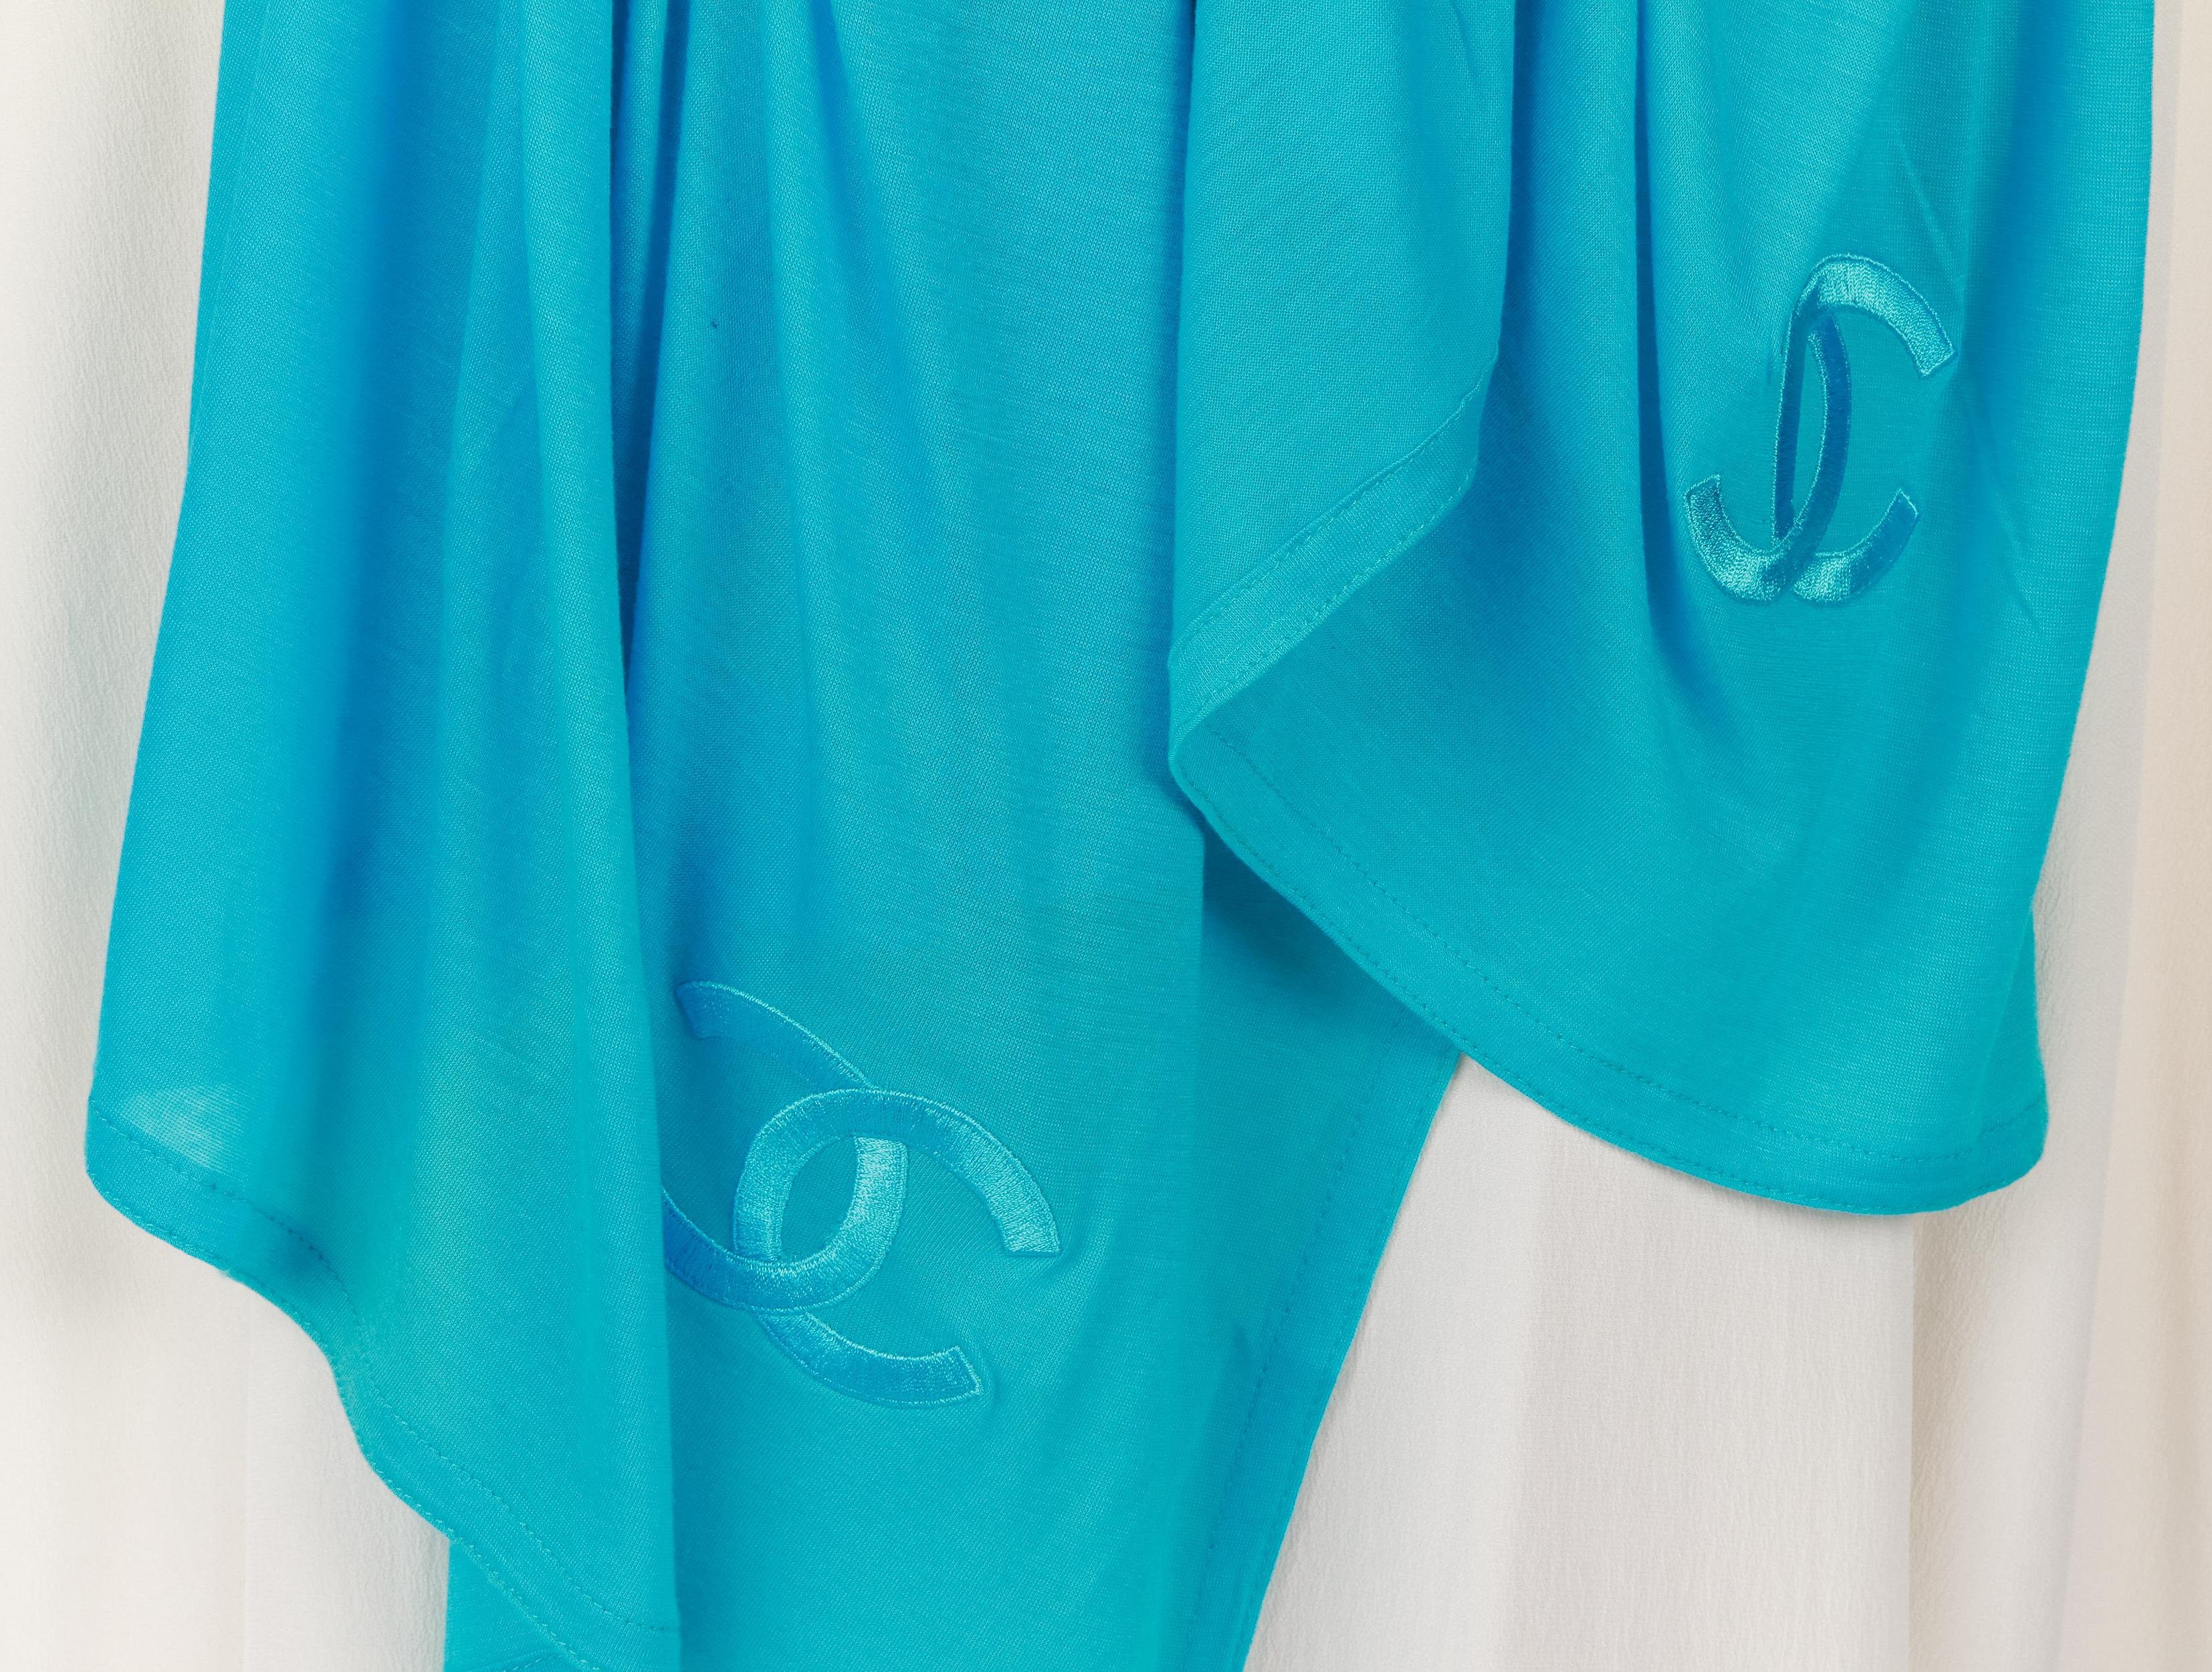 Chanel oversize modal and cashmere turquoise shawls with embroidered large cc logos. Can be worn as a sarong .